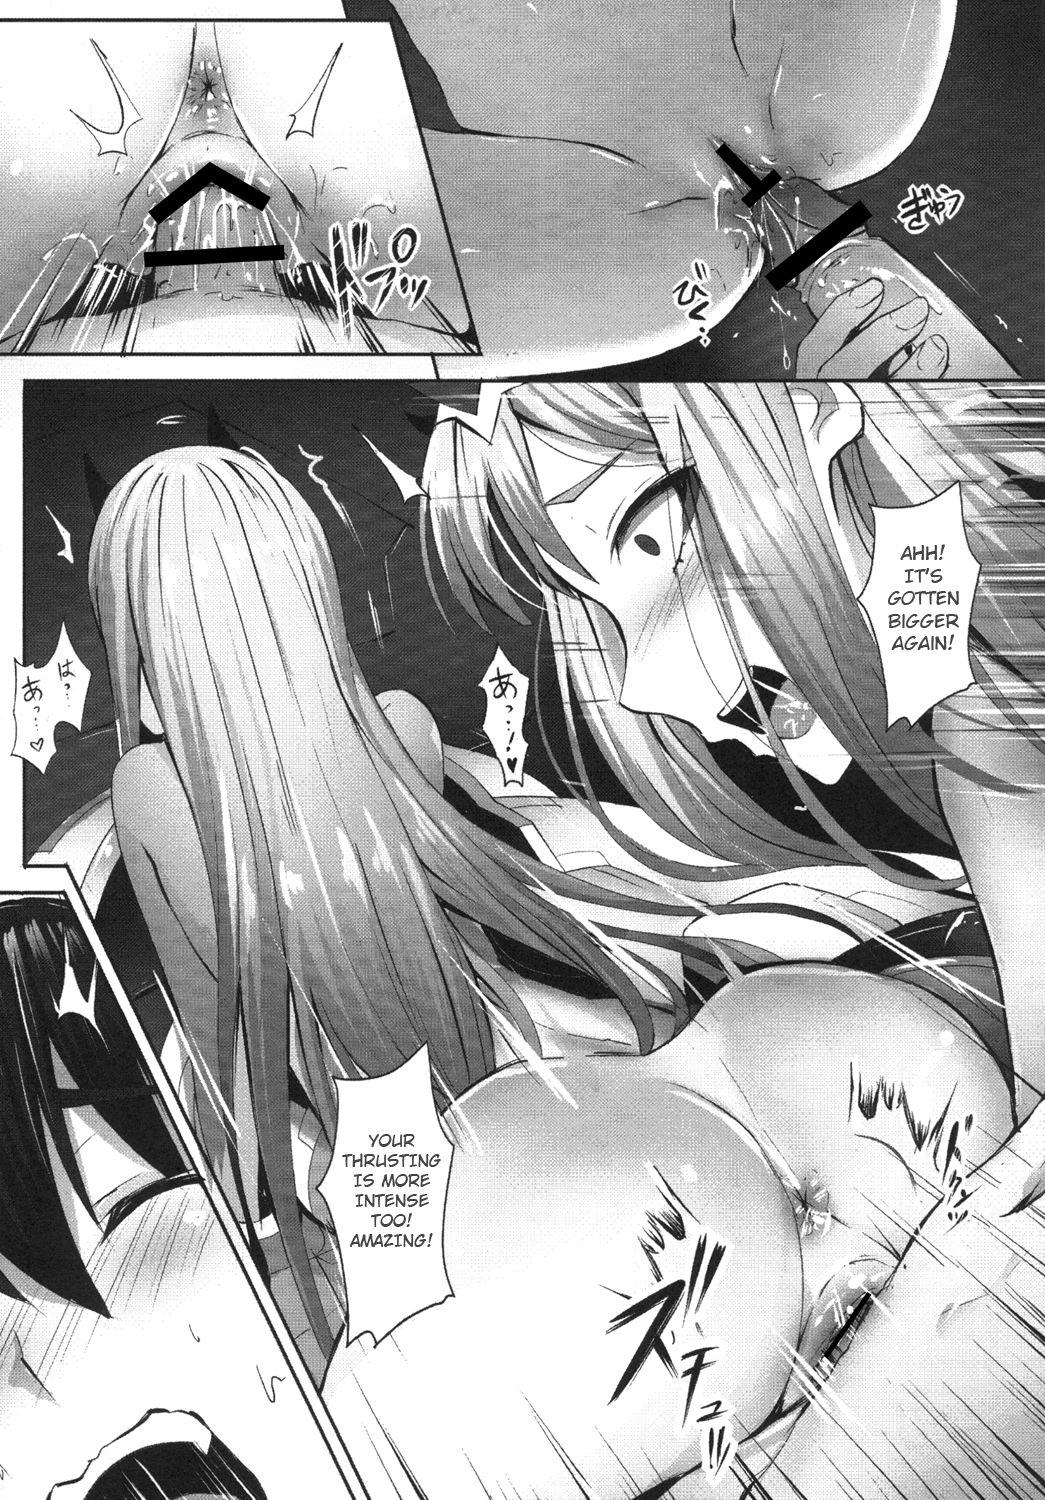 Skinny Darling need more Sexx - Darling in the franxx Stockings - Page 6